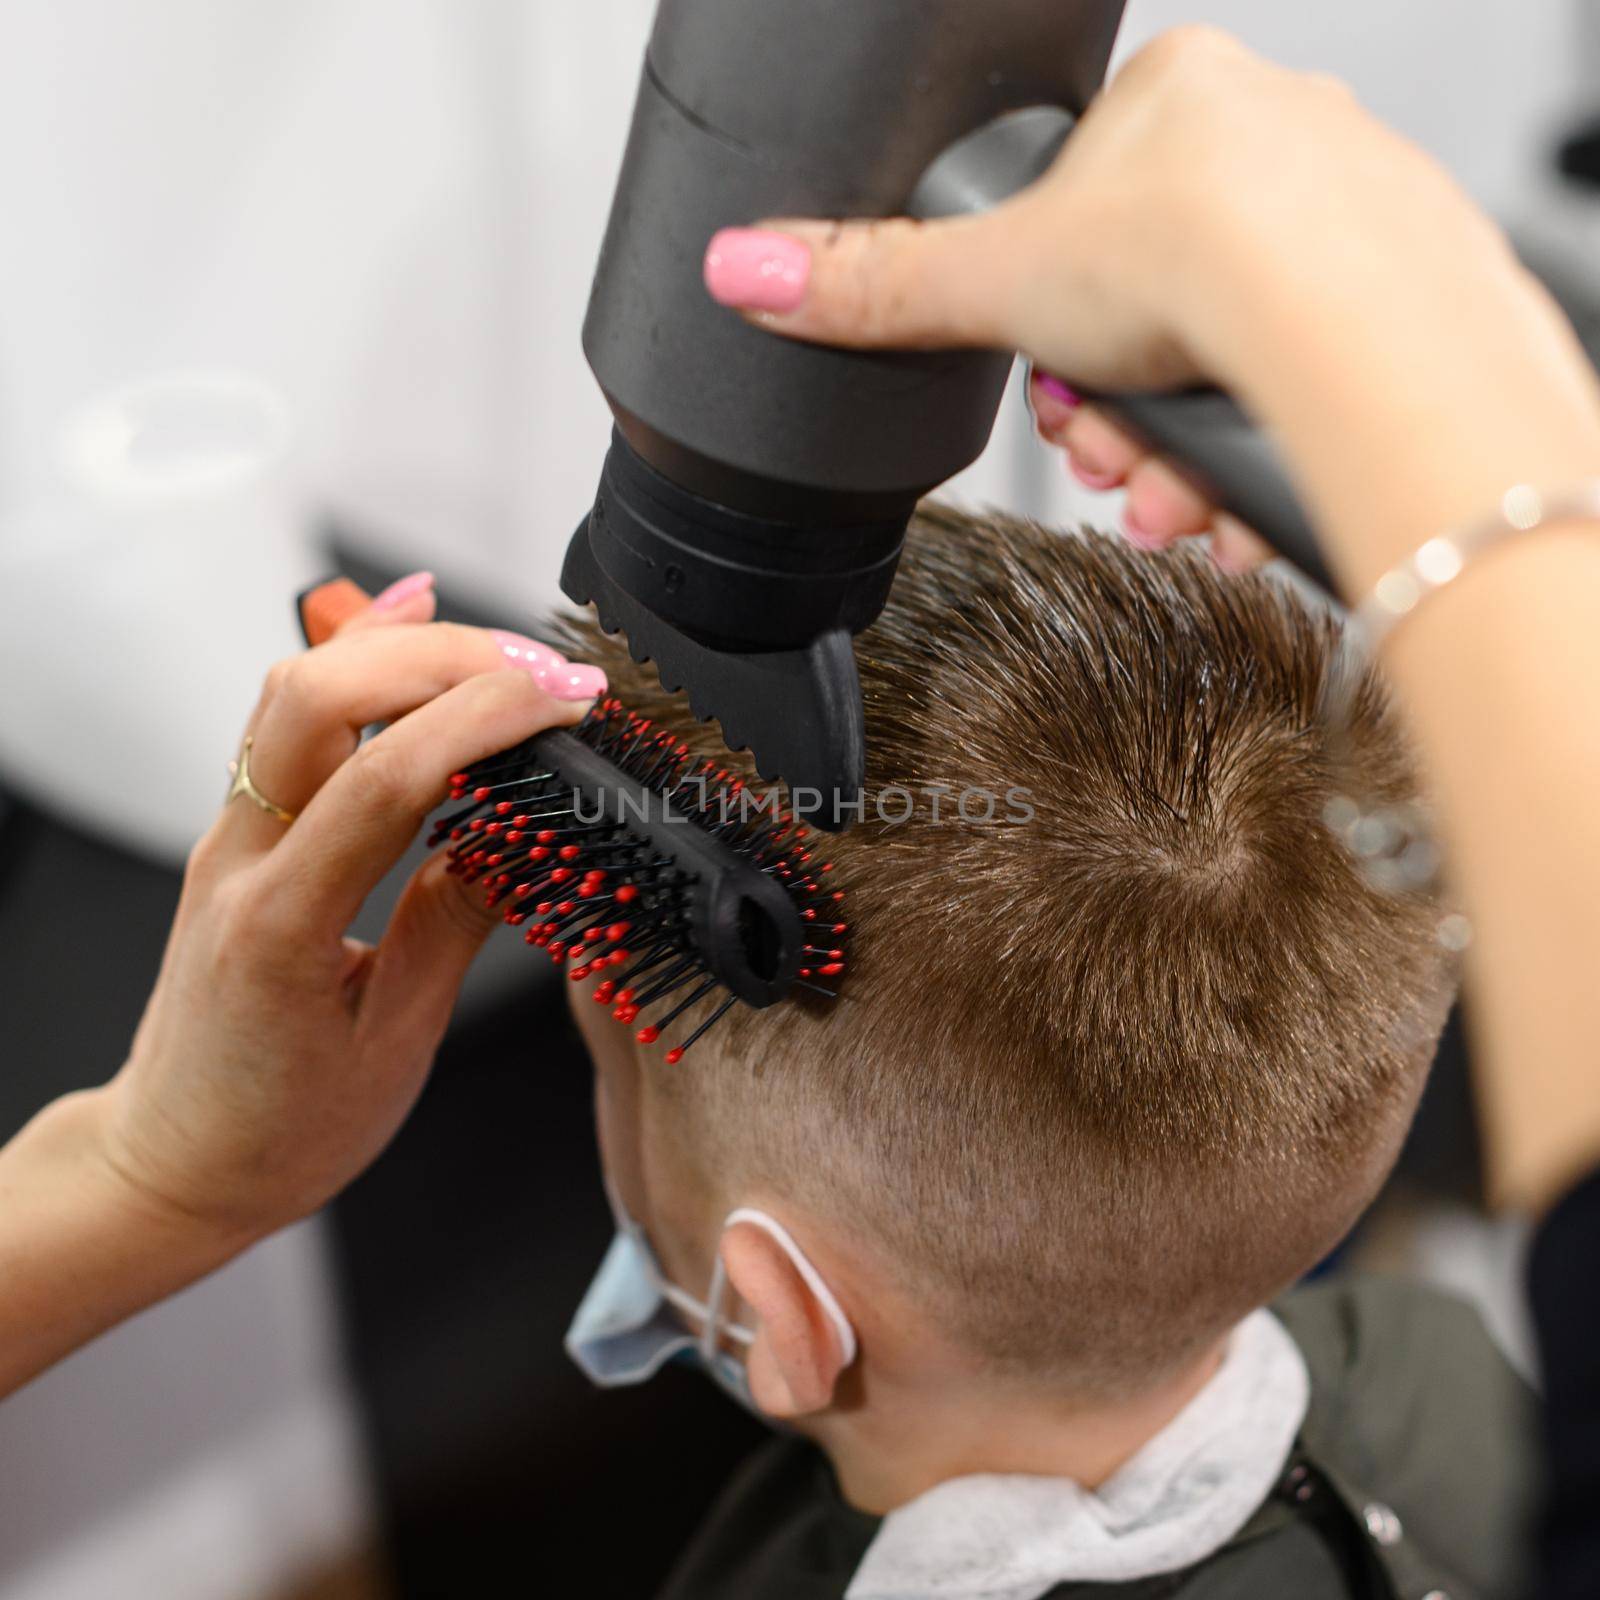 The hairdresser dries and styles the hair with the help of a hair dryer and a comb for a schoolboy boy, visits to the hairdresser during a coronavirus pandemic, black style hairdresser.